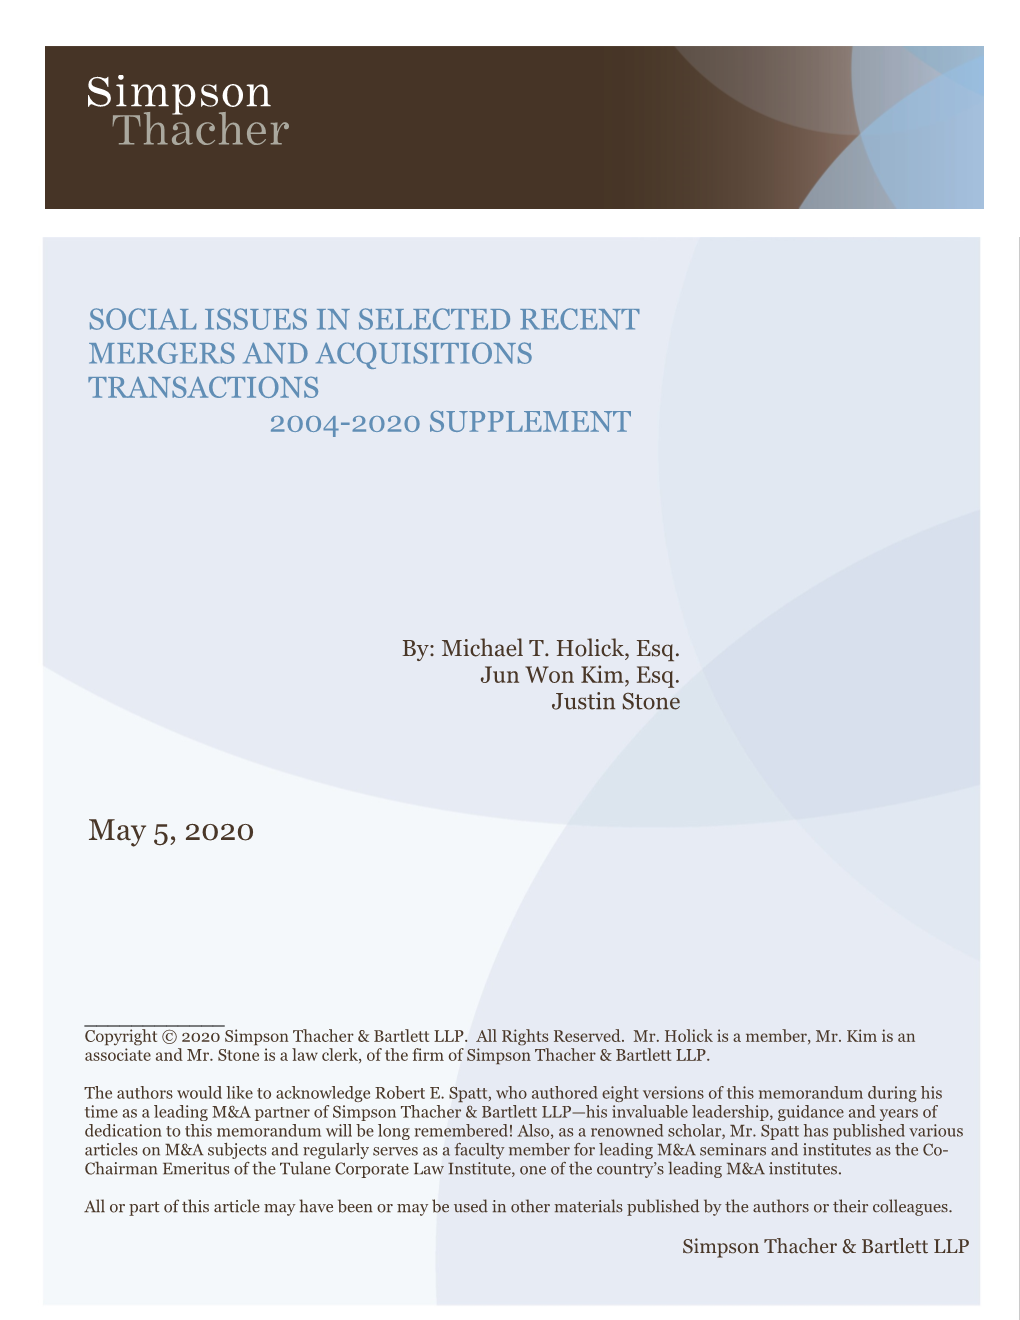 Social Issues in Selected Recent Mergers and Acquisitions Transactions 2004-2020 Supplement